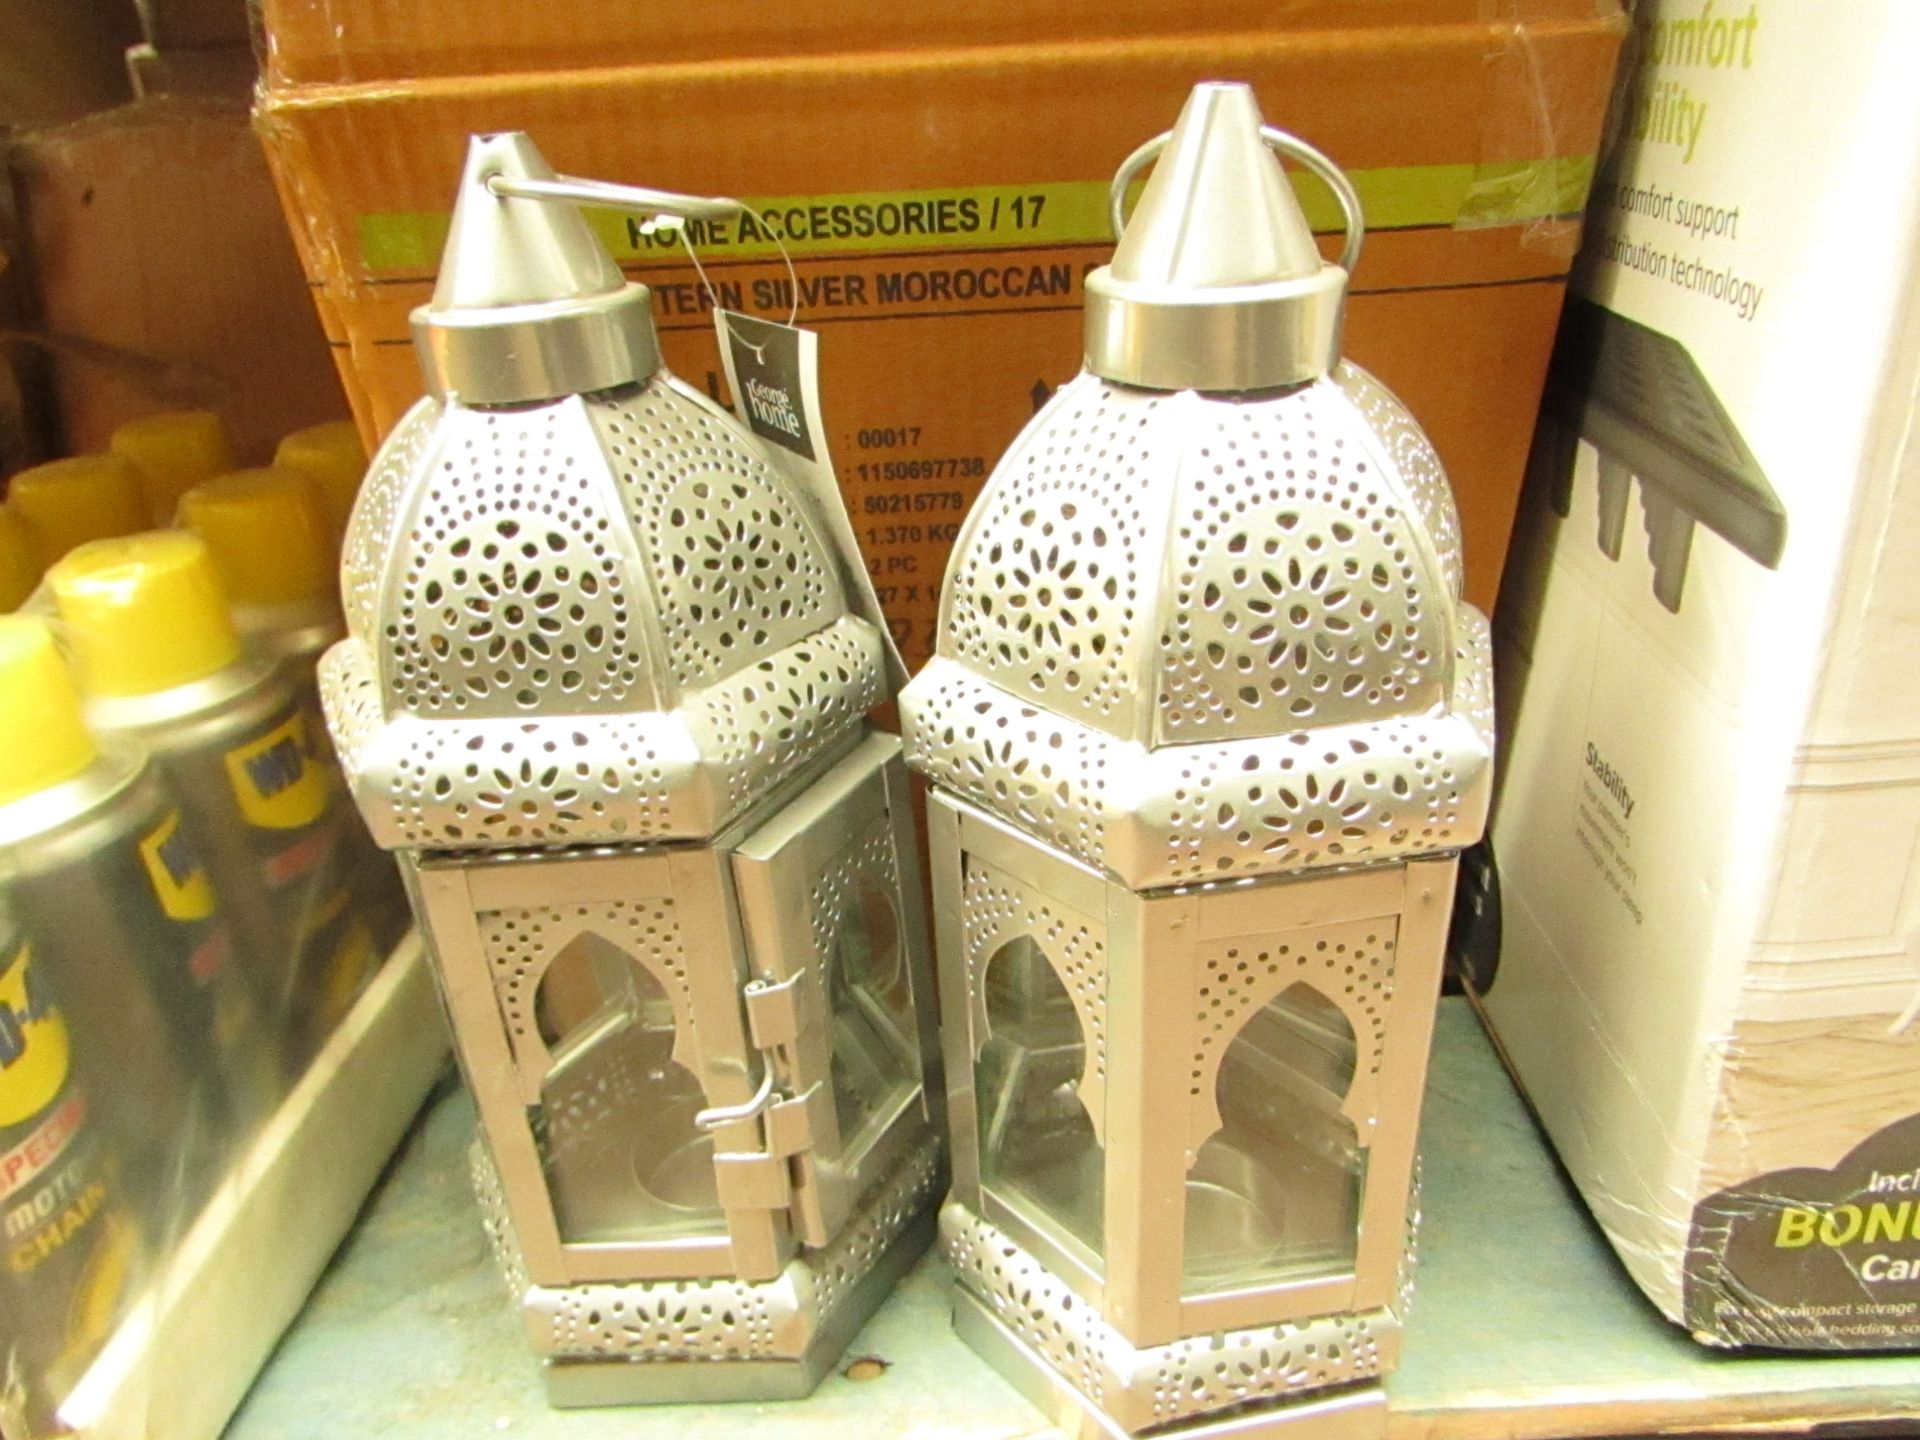 Set of 2 Silver Moroccan Lanterns. New & Boxed